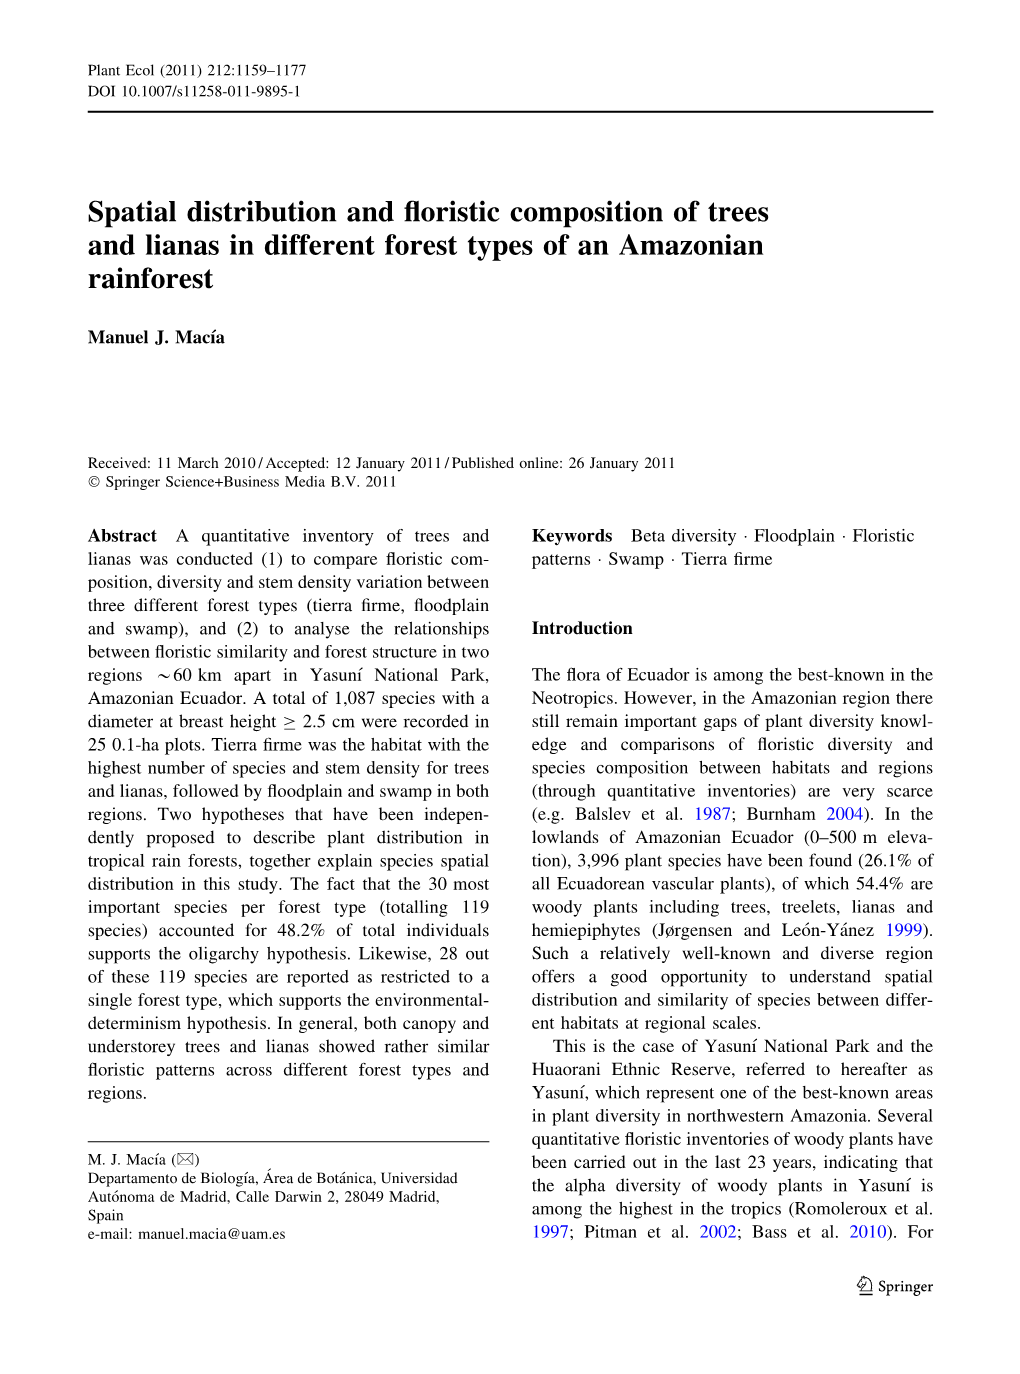 Spatial Distribution and Floristic Composition of Trees and Lianas in Different Forest Types of an Amazonian Rainforest